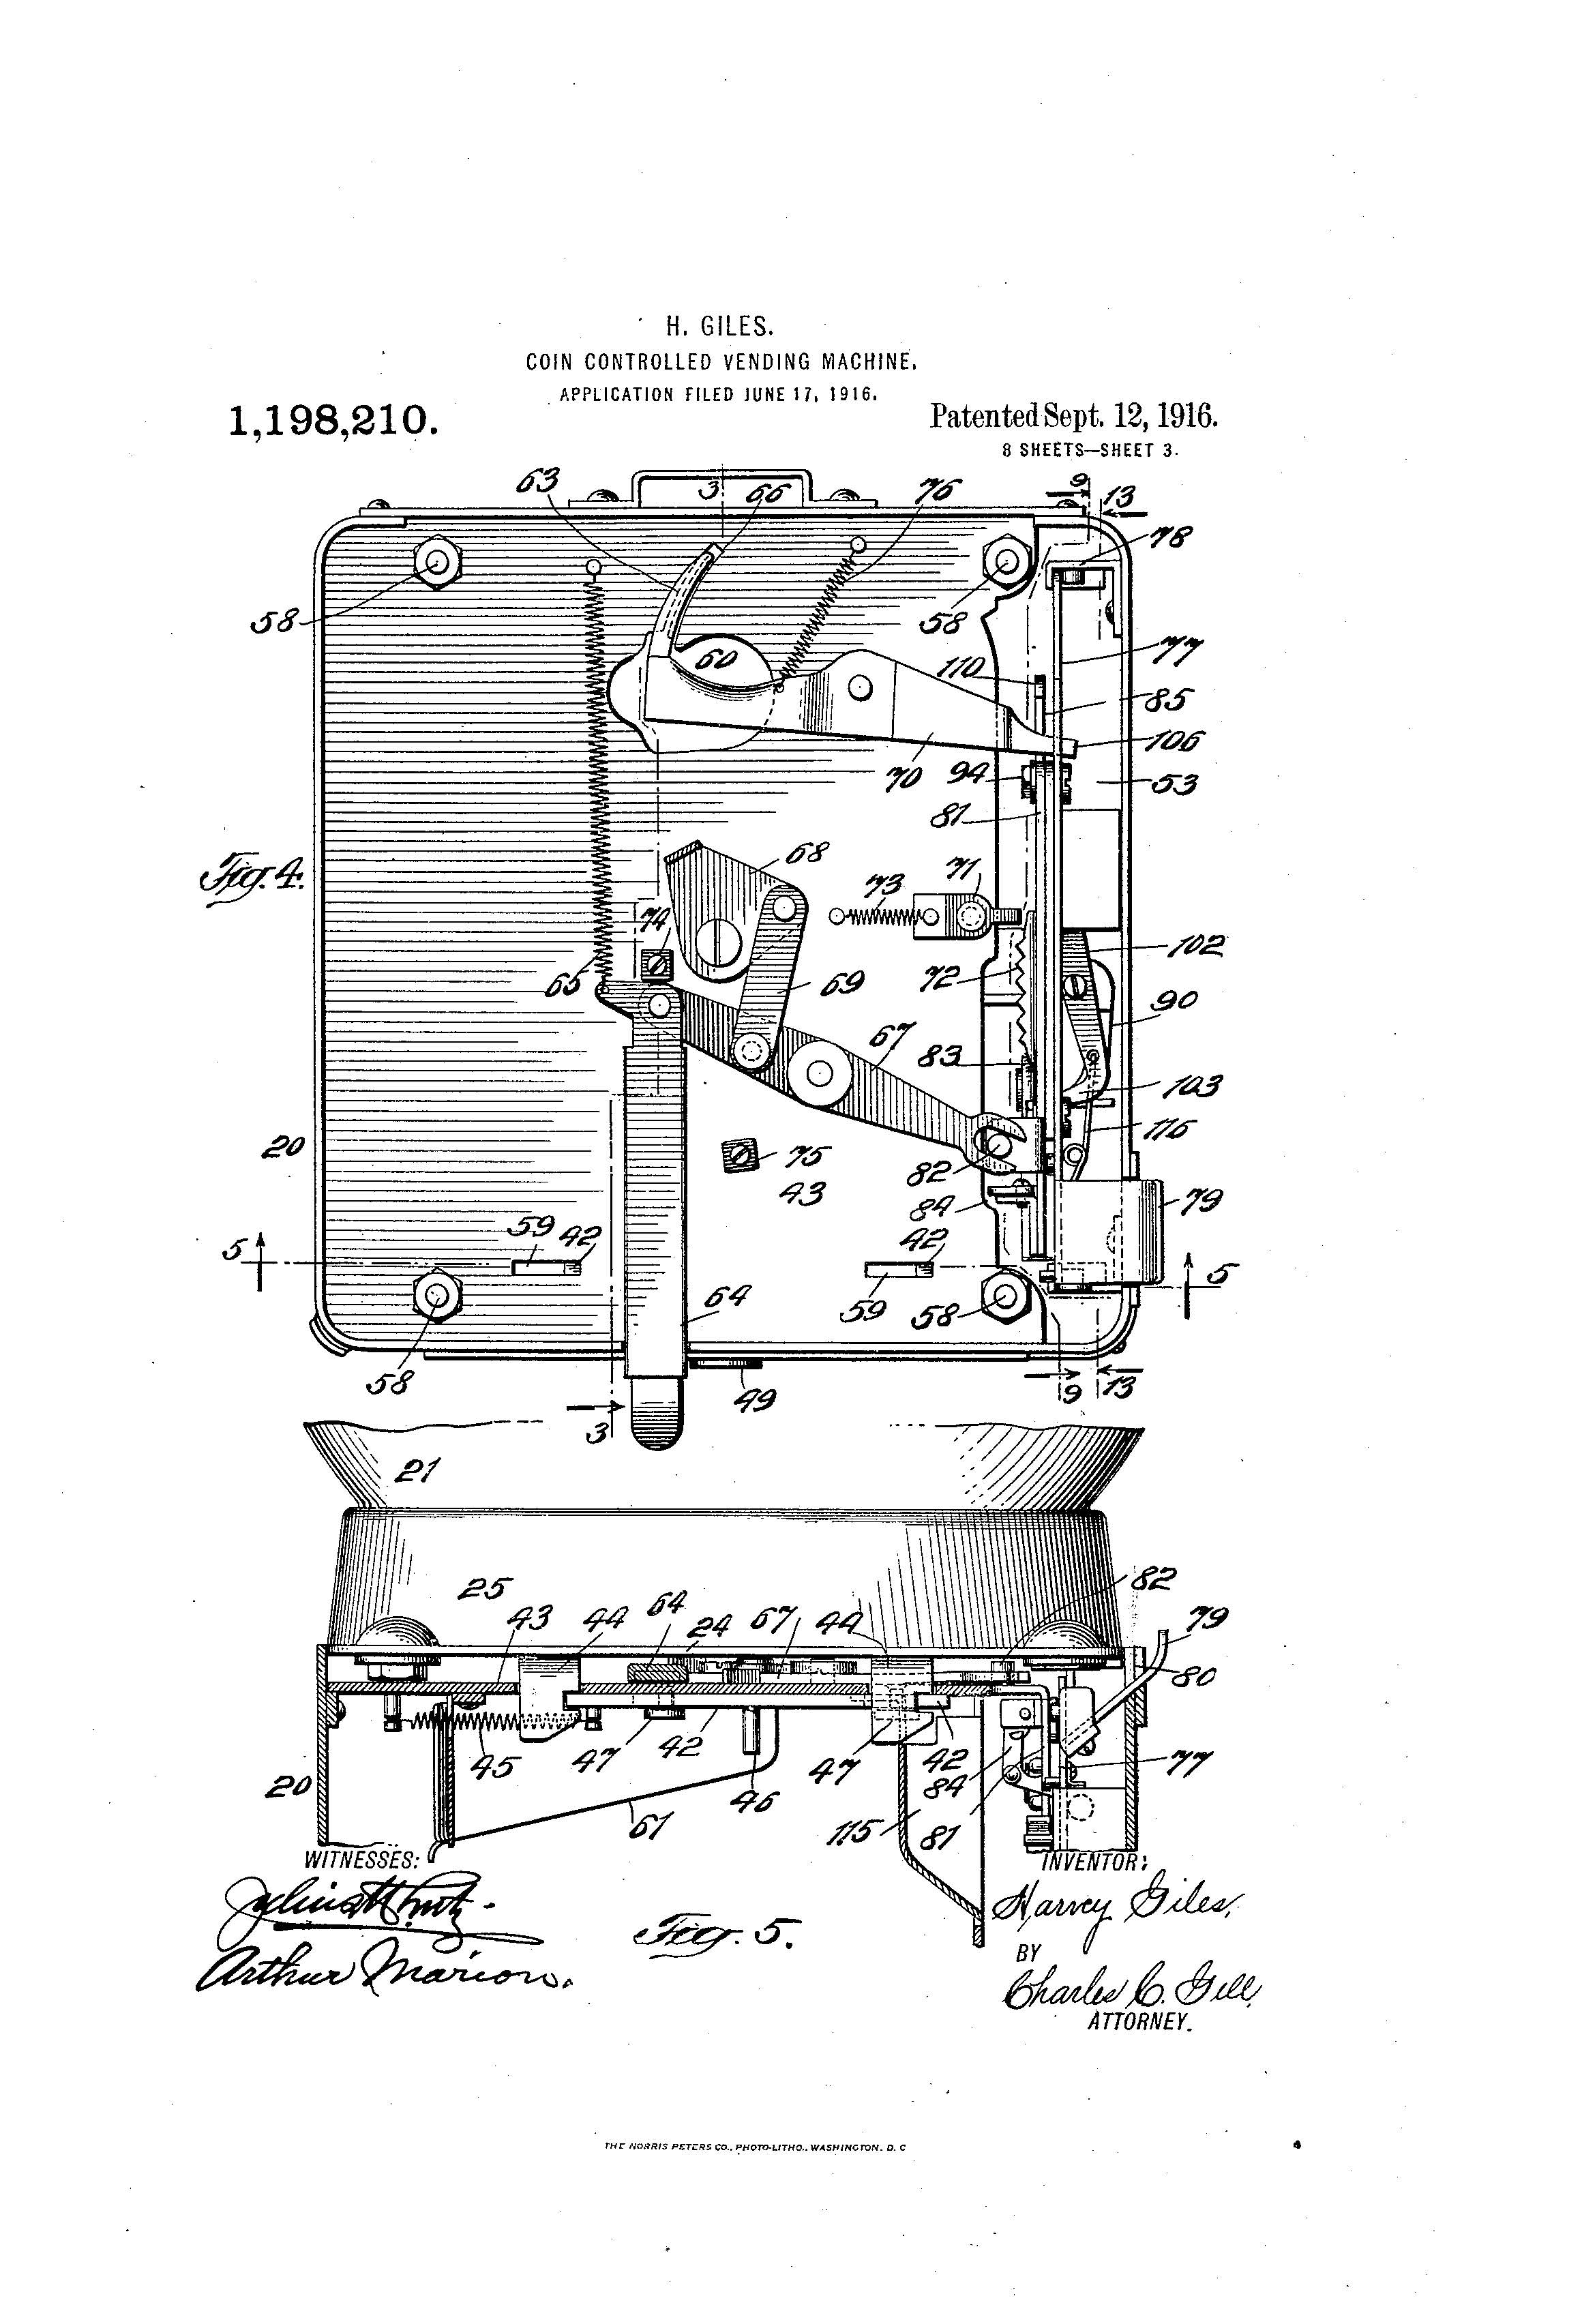 patent-illustration-coin-controlled-vending-machine_page_3